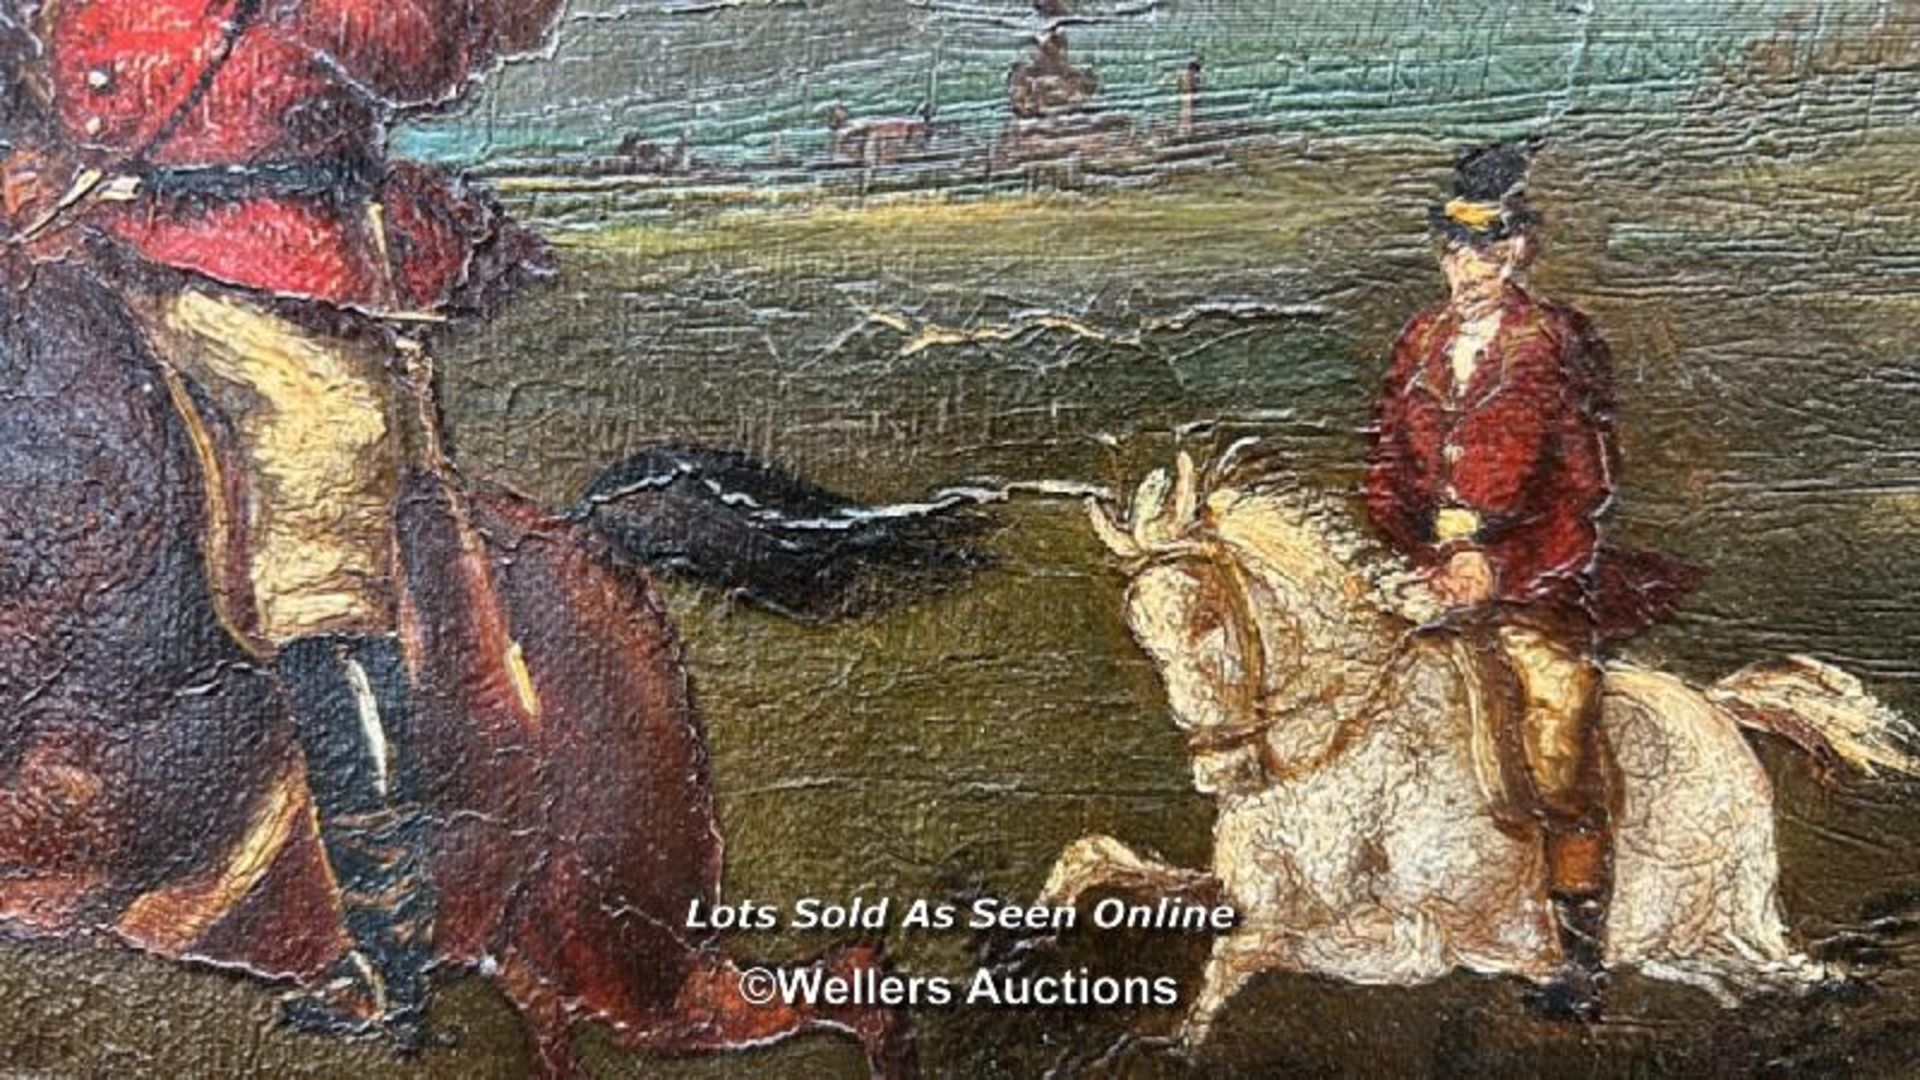 OIL PAINTING DEPICTING A HUNTING SCENE - Image 6 of 6